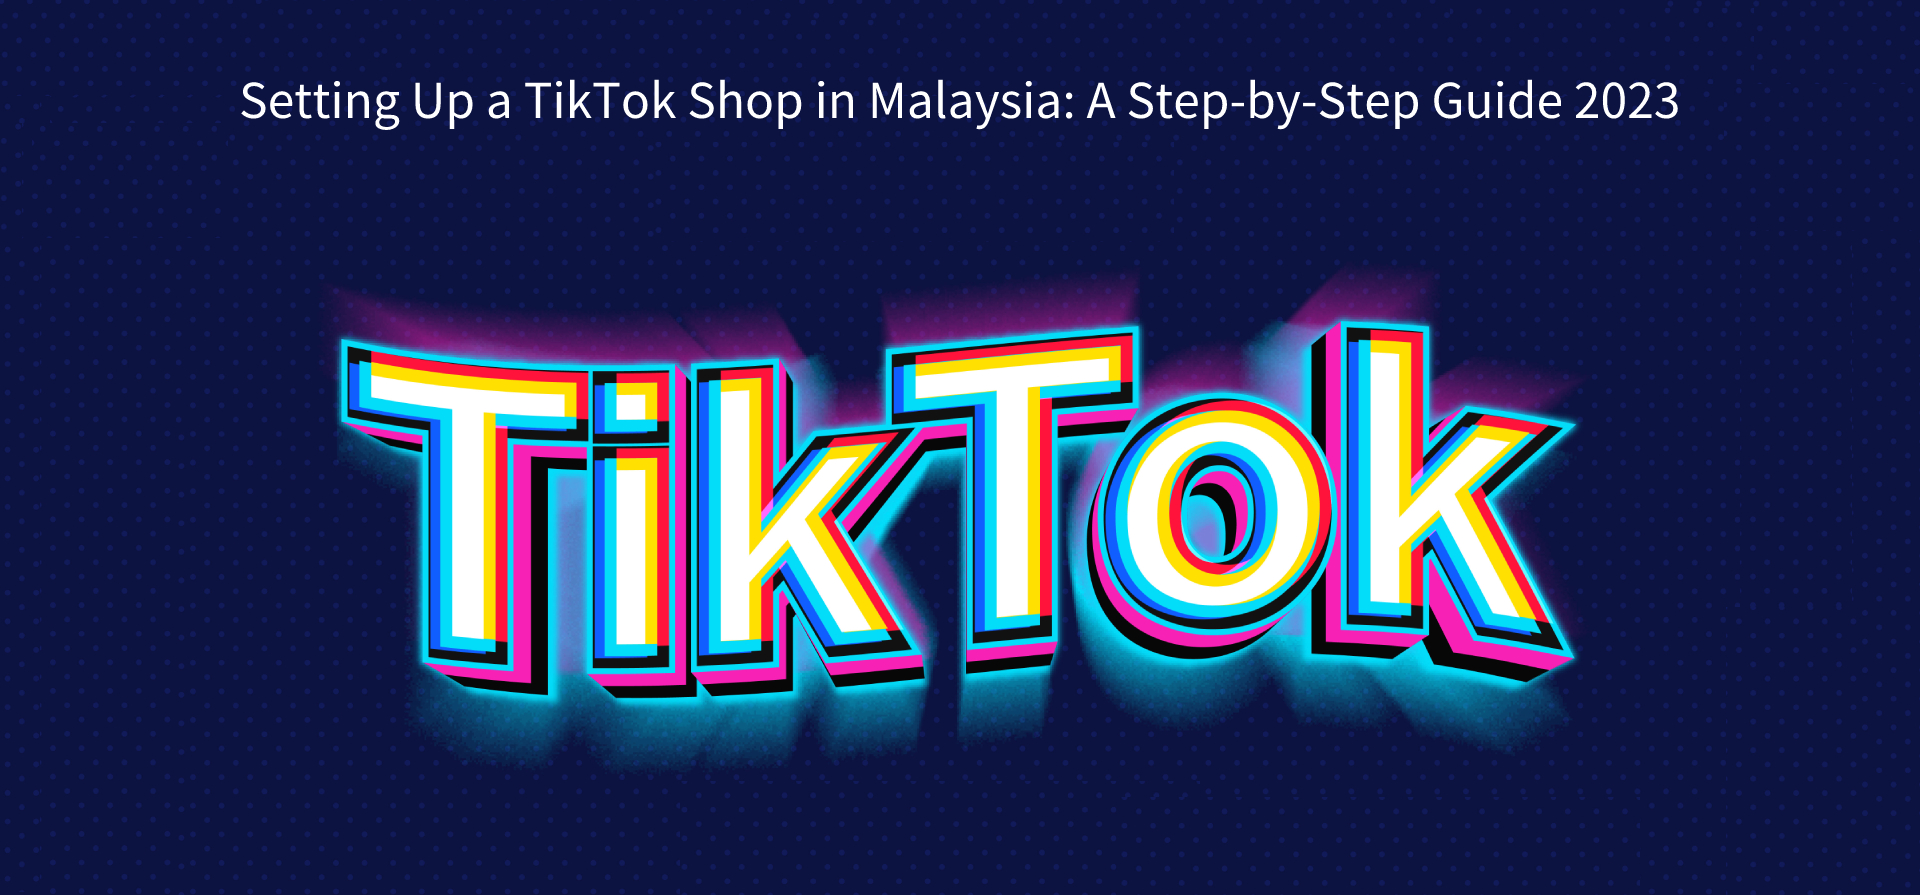 Setting Up a TikTok Shop in Malaysia: A Step-by-Step Guide 2023